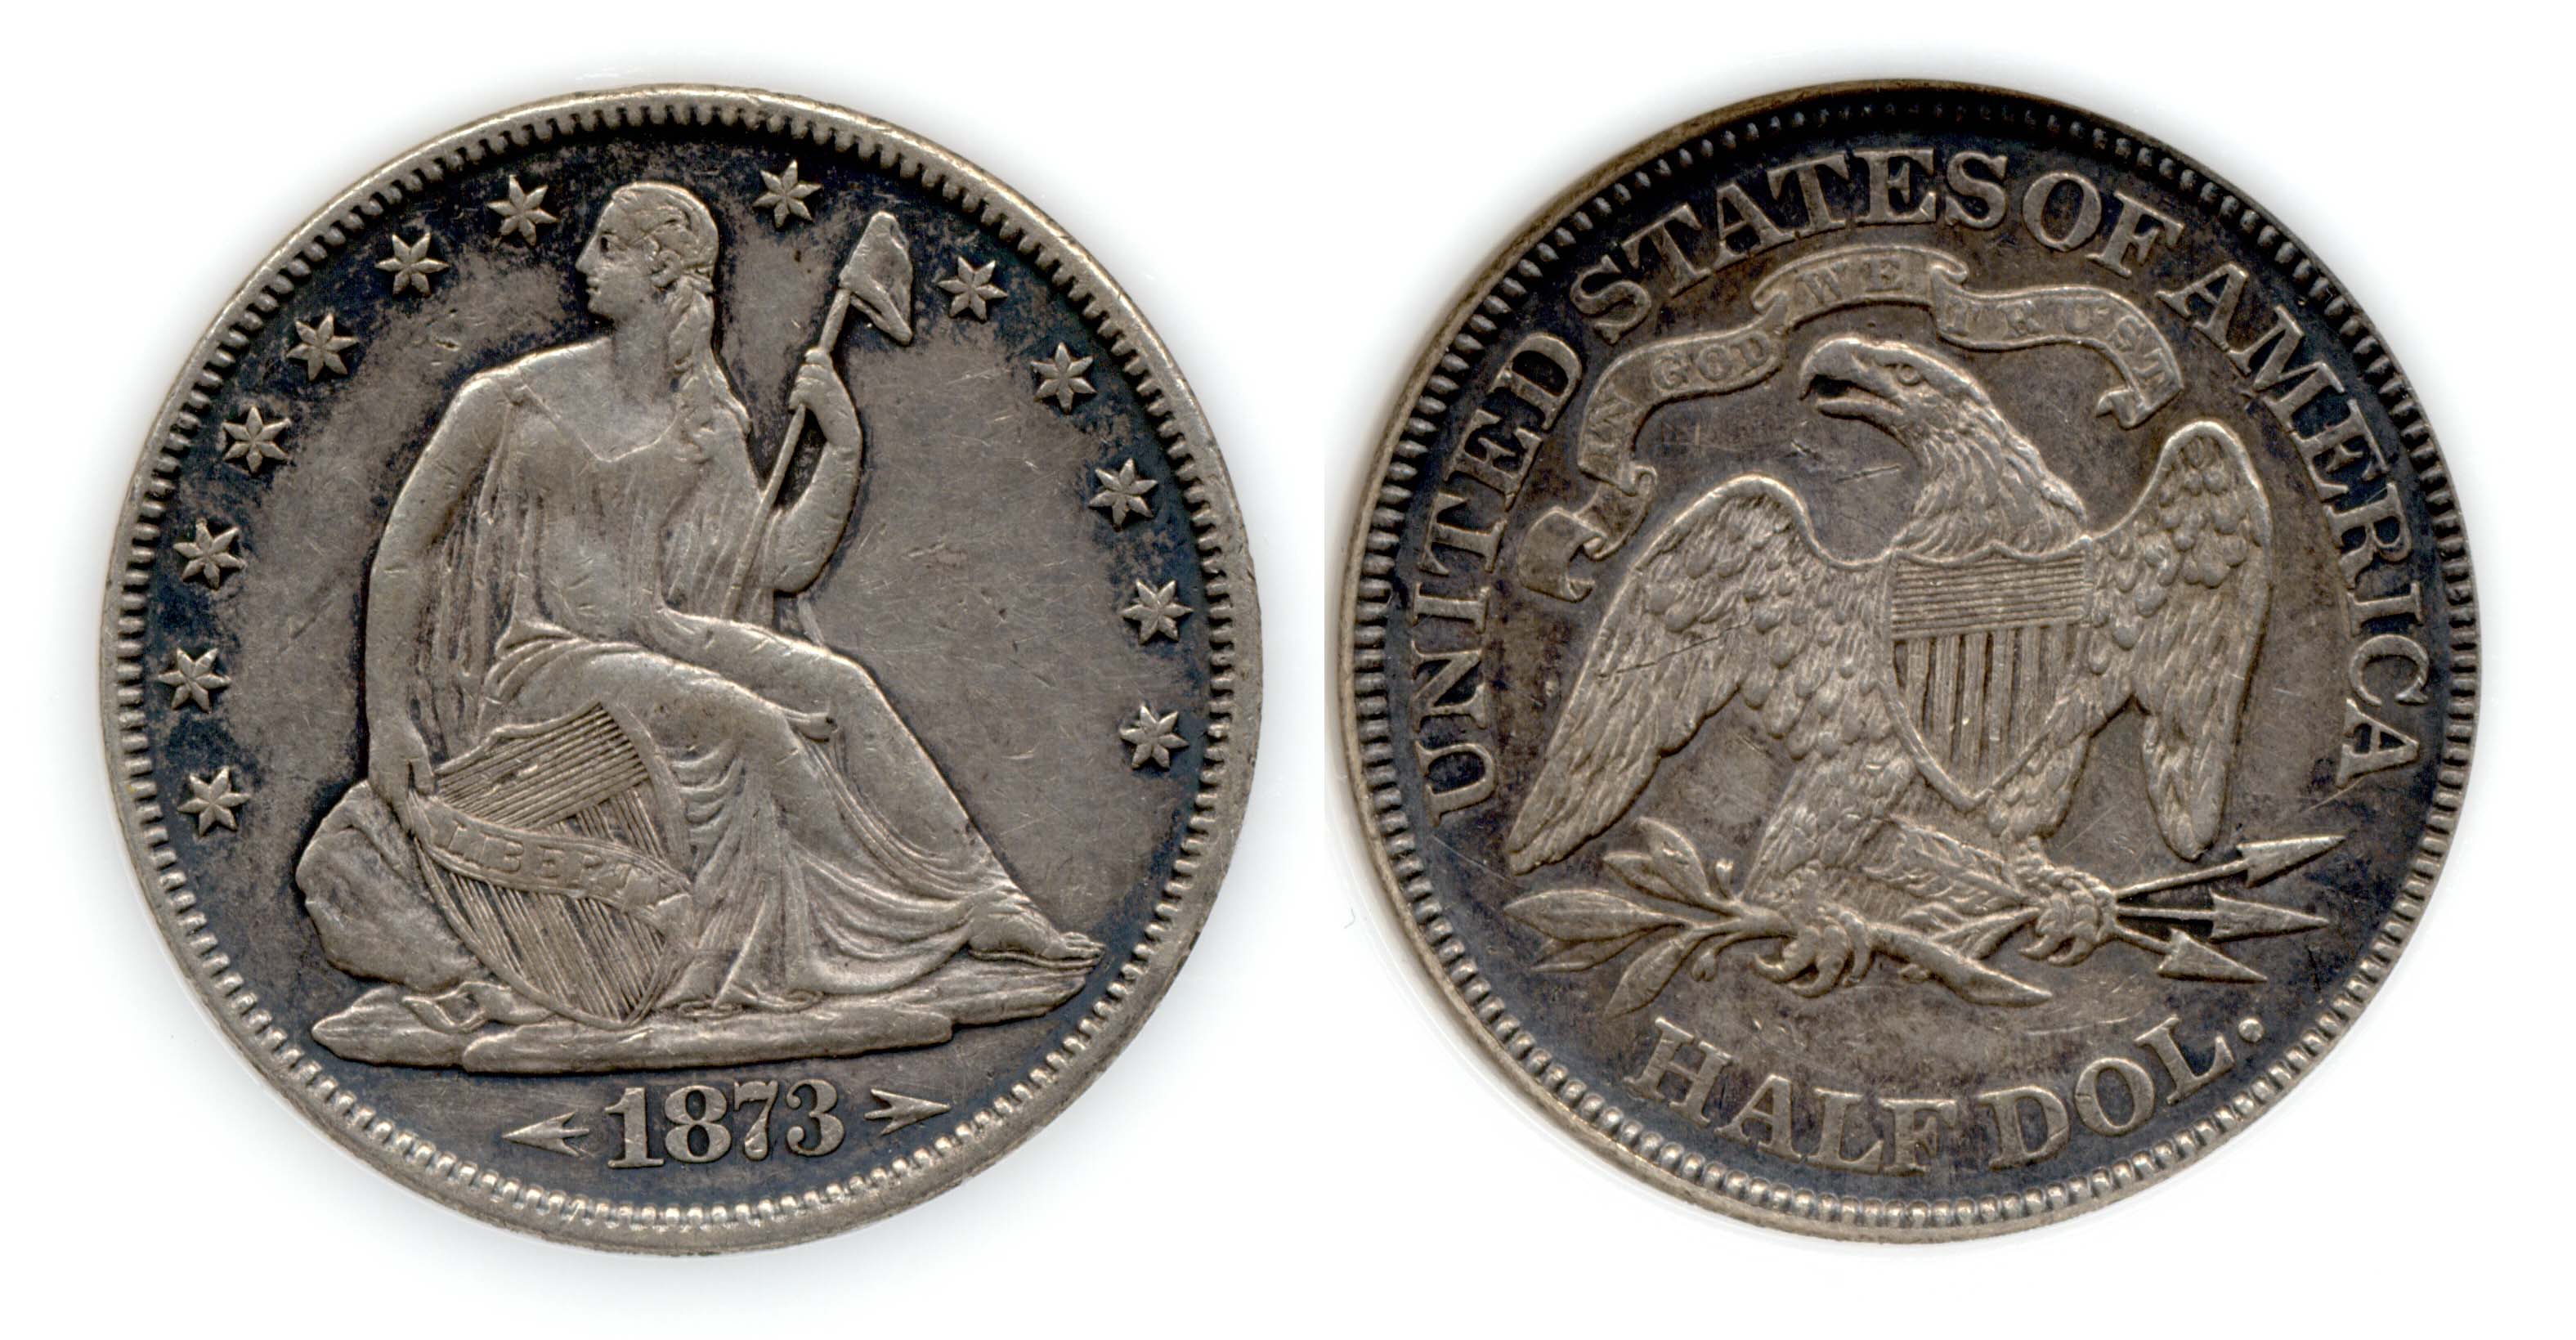 1873 Seated Liberty Half Dollar PCI EF-45 Breen 4975 Doubled Die Obverse